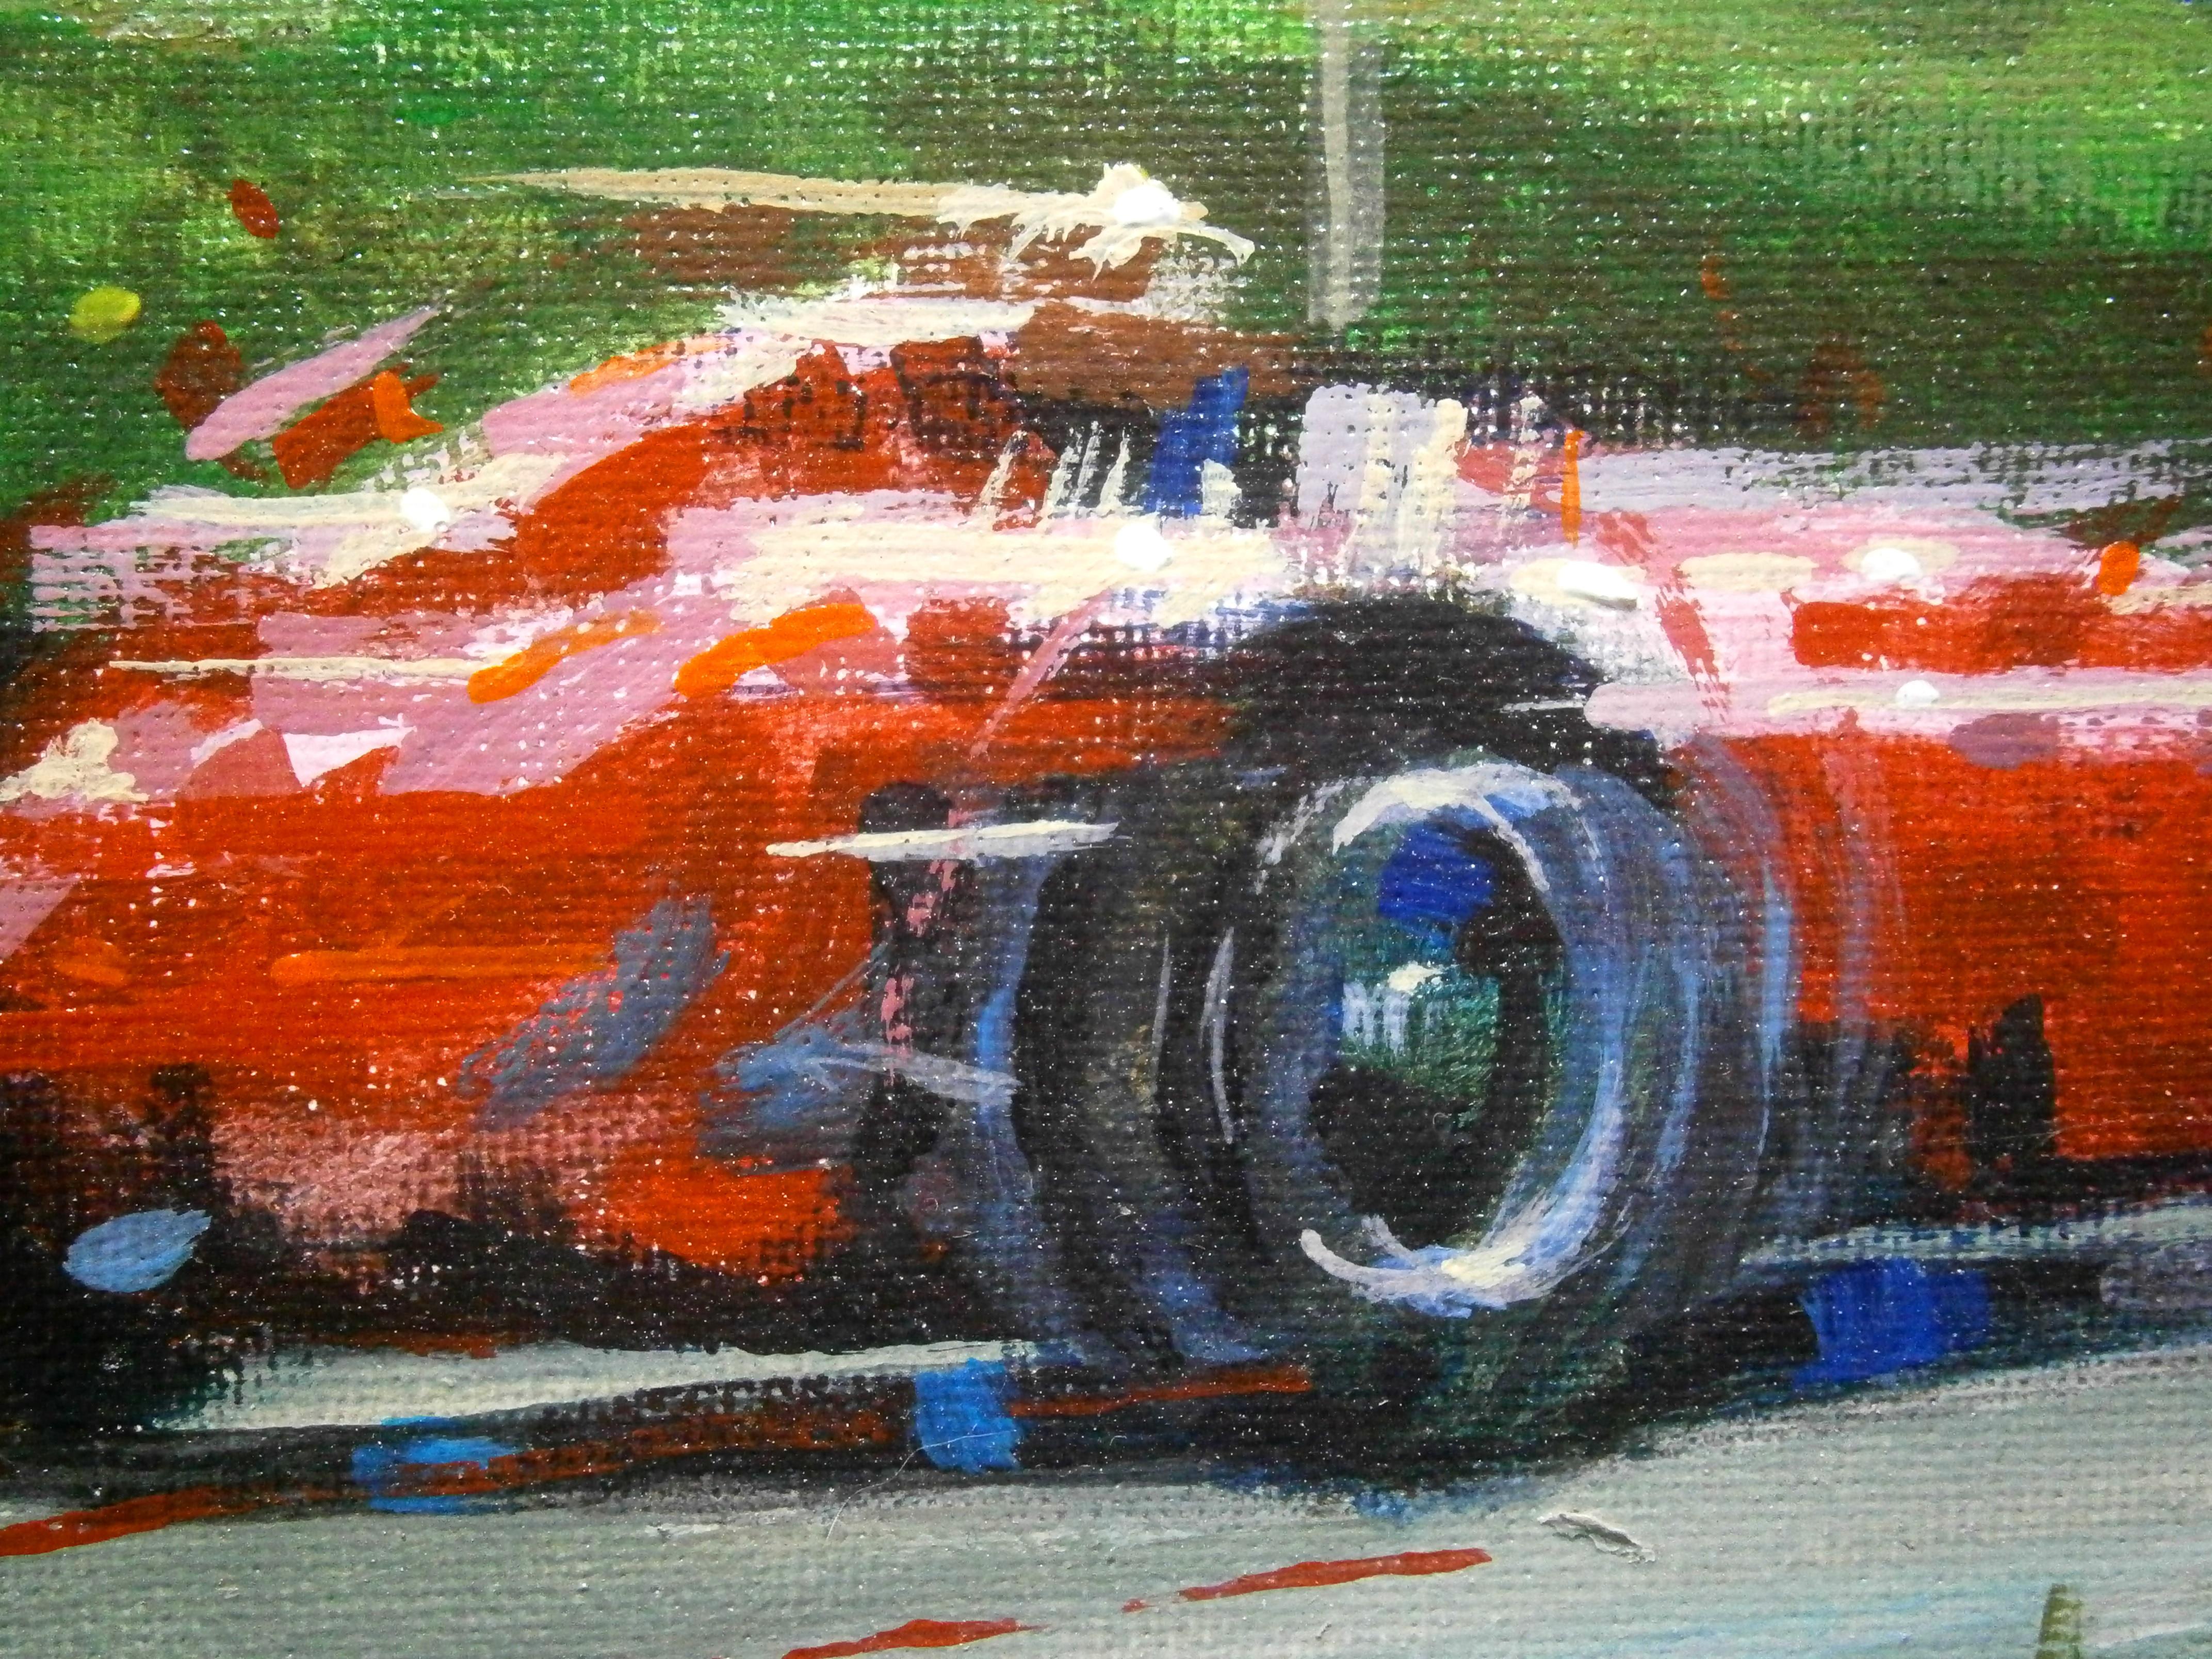 Peter Collins. 1956. Ferrari Lancia D50. original painting
BALAGUER , Alex ( Barcelona 1968 )
During early childhood, Àlex Balaguer began to sketch motorcars symbolic of Maranello’s trademark vehicle.
Self-taught in the art world, Balaguer decided